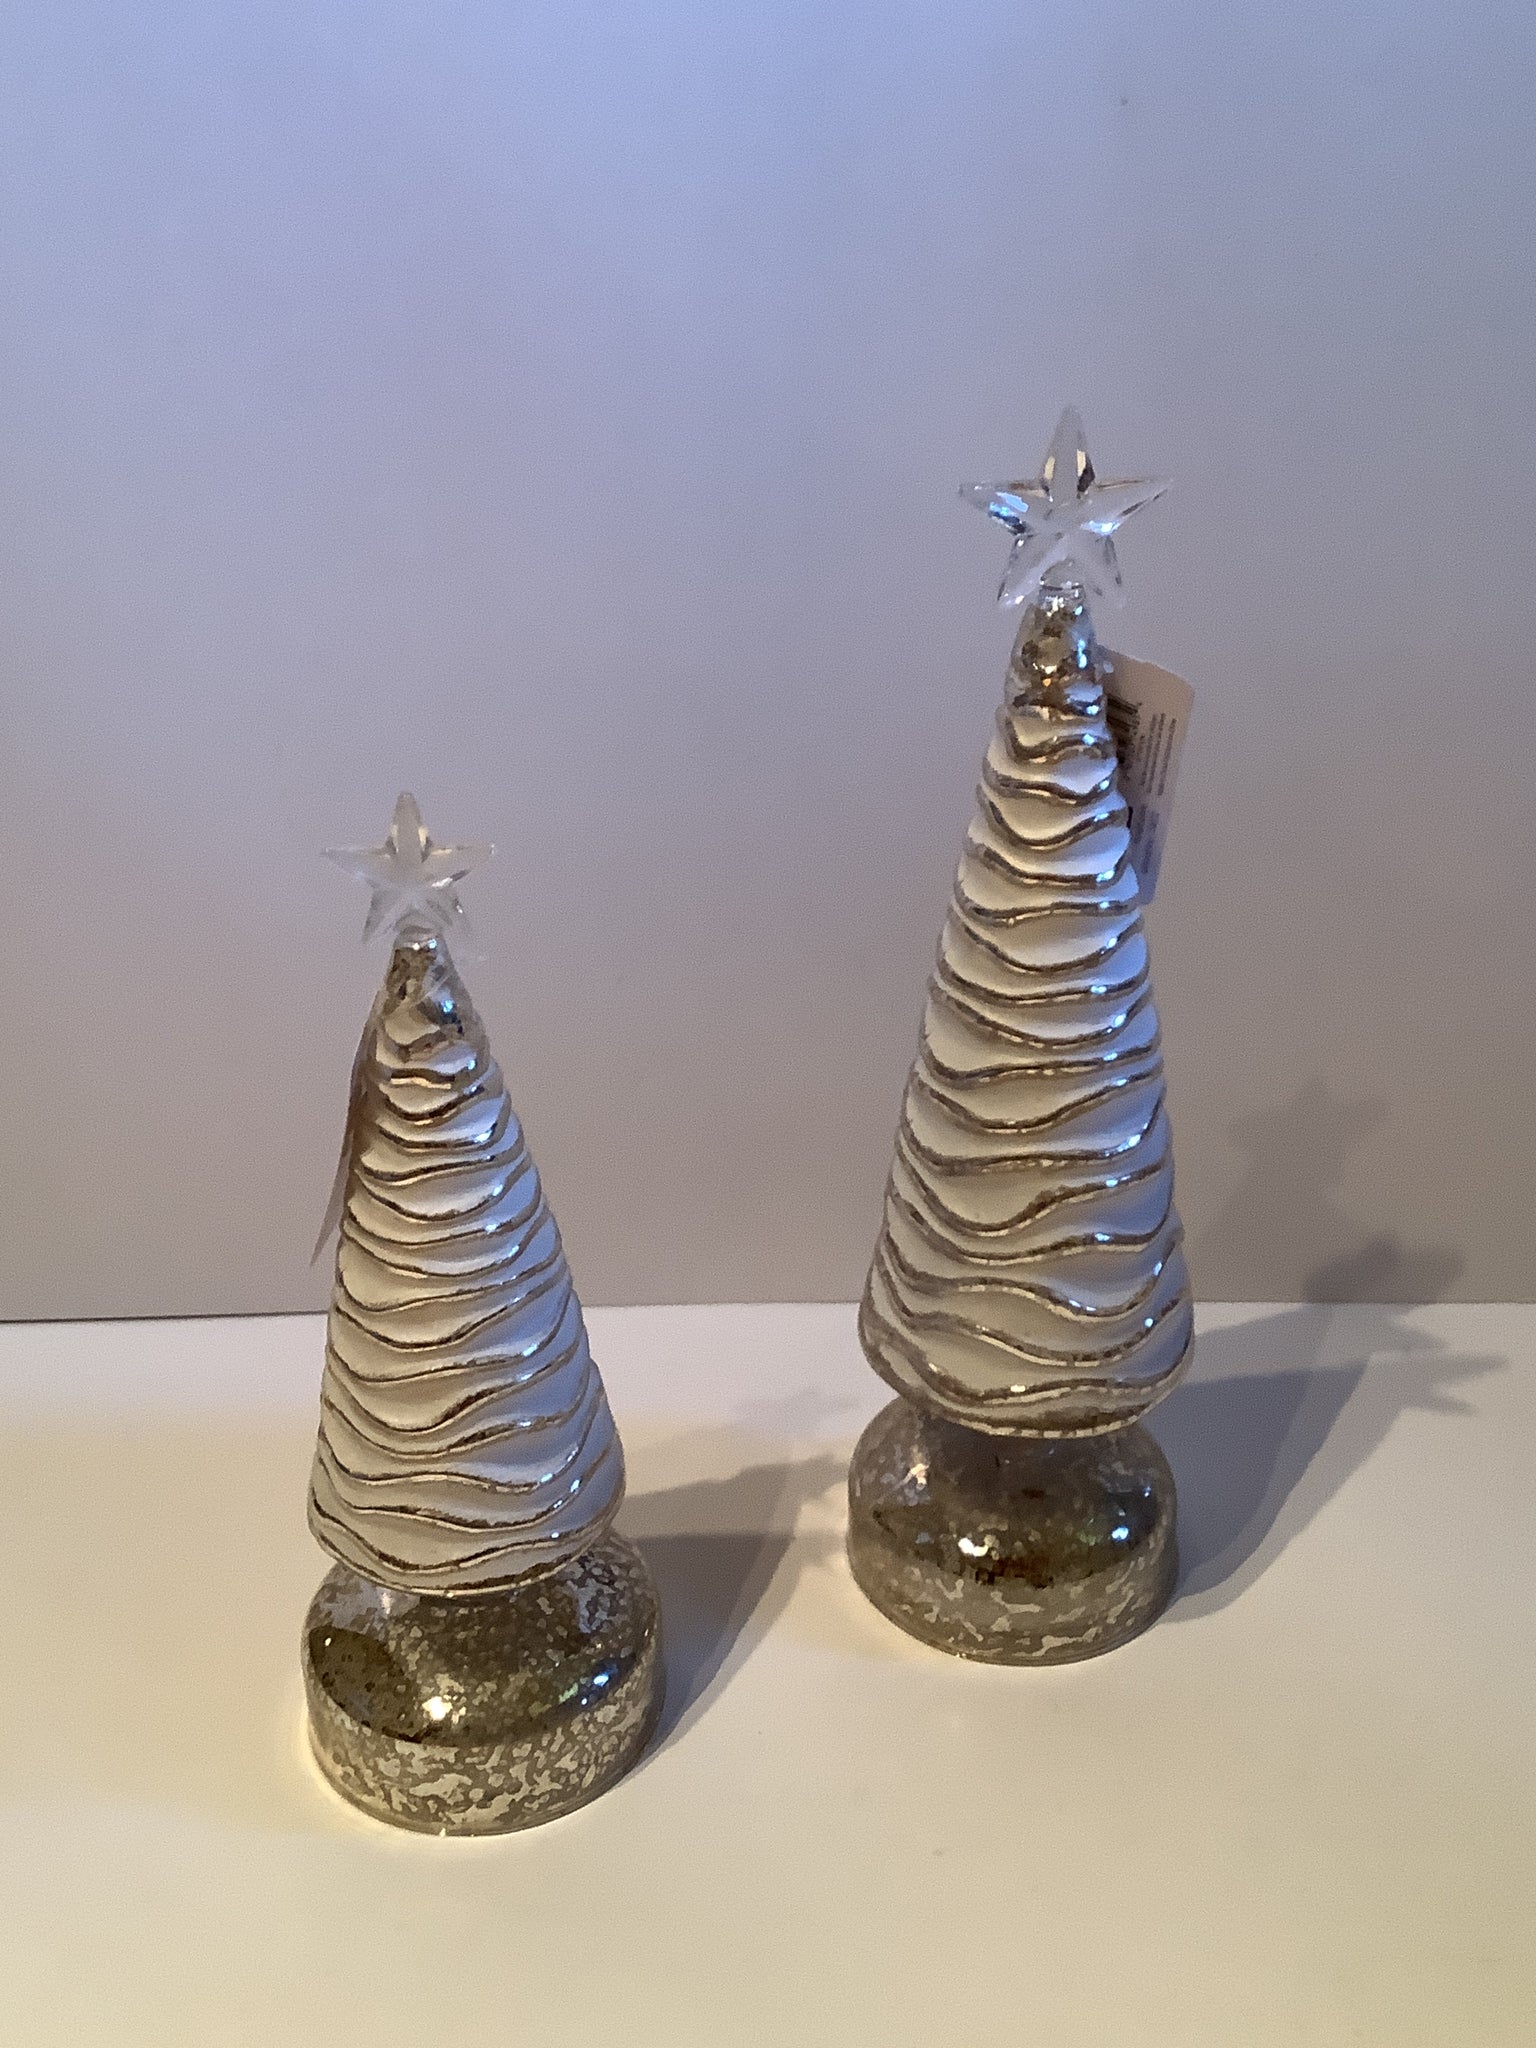 Lighted glass Christmas trees (2 sizes)